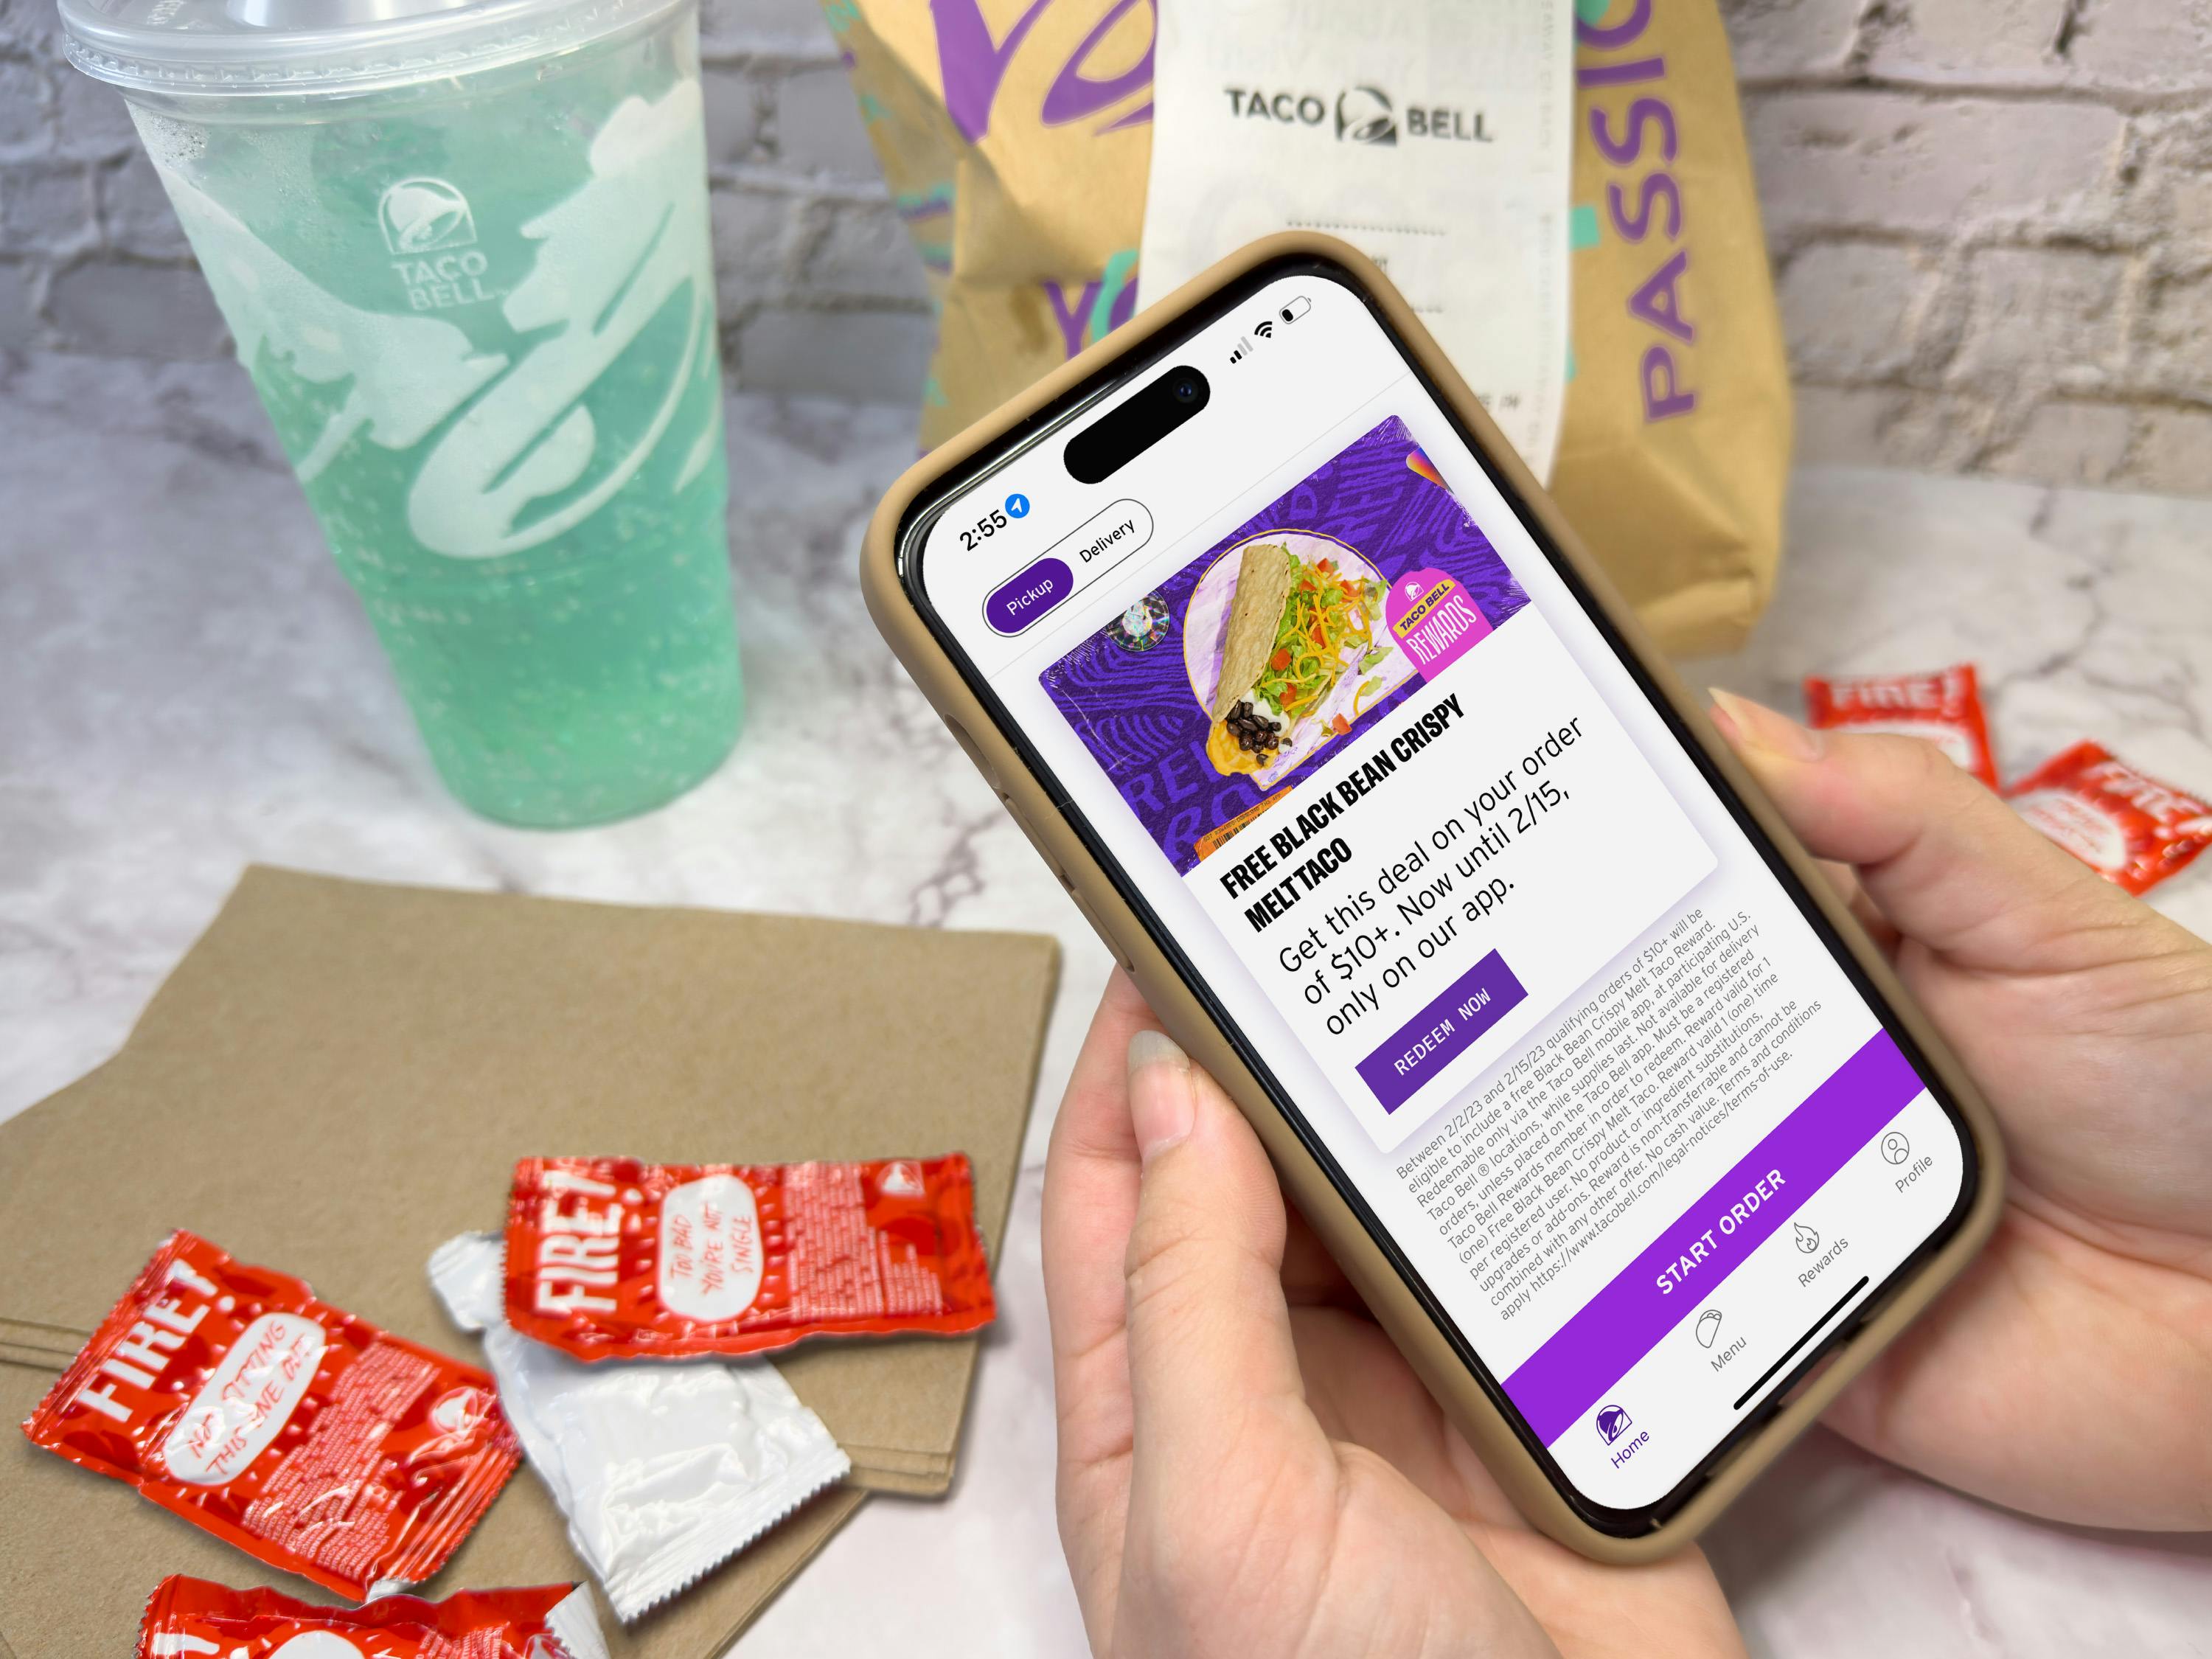 Someone looking at the offer for a free Crispy Melt Taco in the Taco Bell app